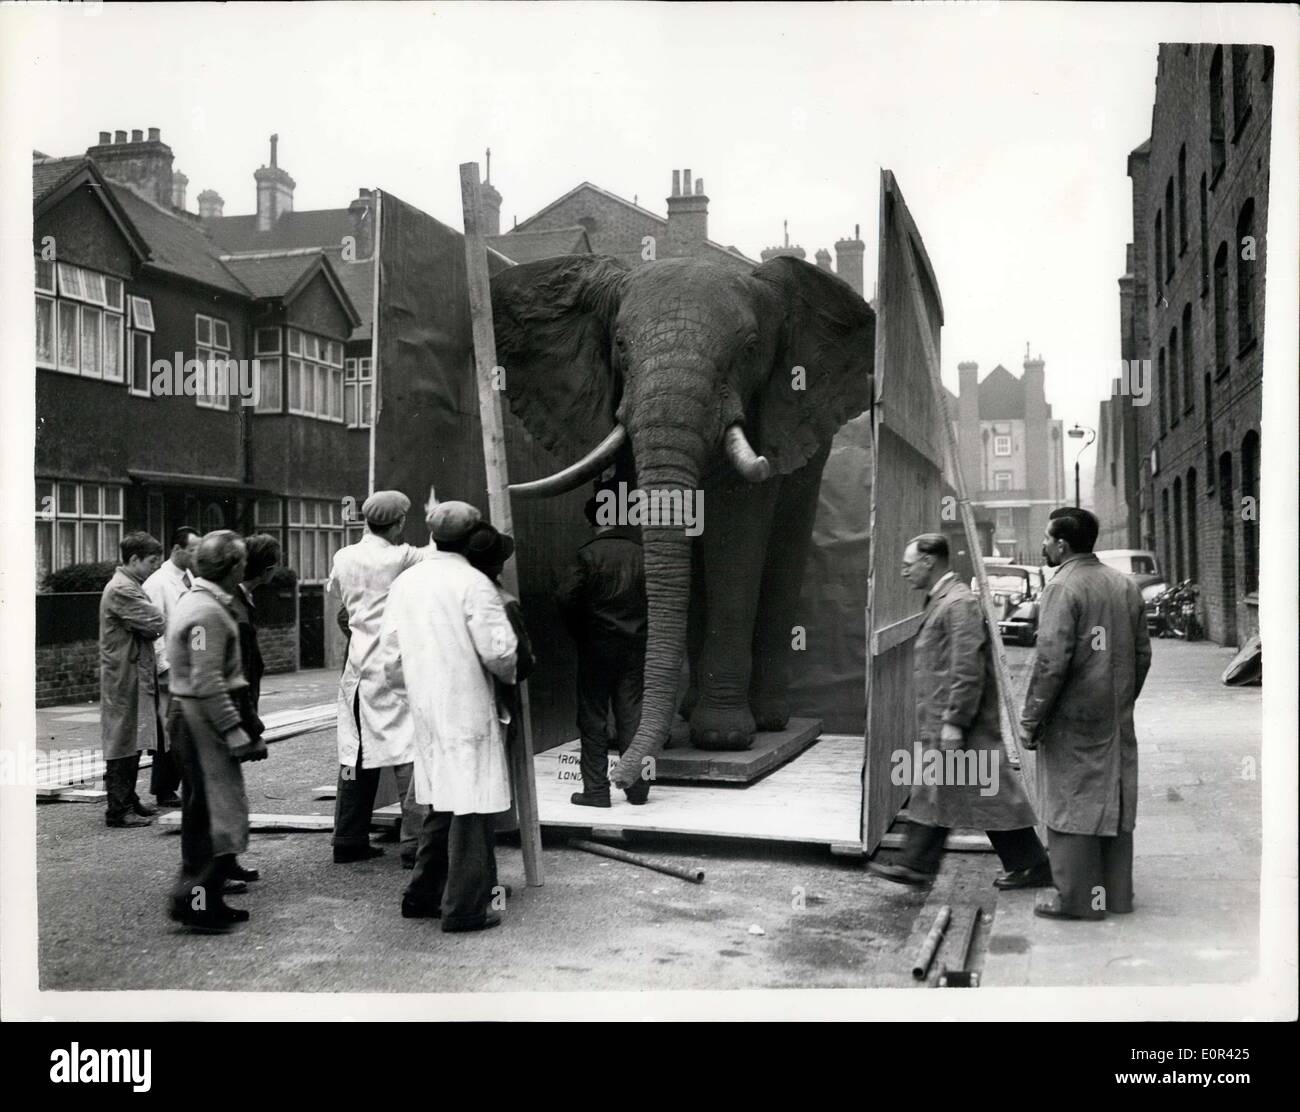 Nov. 26, 1957 - MR. BEST CONSTRUCTS AN ELEPHANT - FOR THE BELGIAN EXHIBITION.. MR. GERALD BEST who works for a London firm of taxidermists - has just completed - his biggest assignment. It is the construction of an elephant - which weighs a ton and a half - and which has cost ?5,000.. The elephant was shot in the Belgian Congo - and the skin shipped to London.. The stuffed elephant is for exhibition at the Belgian Exhibition.. Keystone Photo Shows:- The stuffed elephant - outside the studio in Kentish Town. Stock Photo